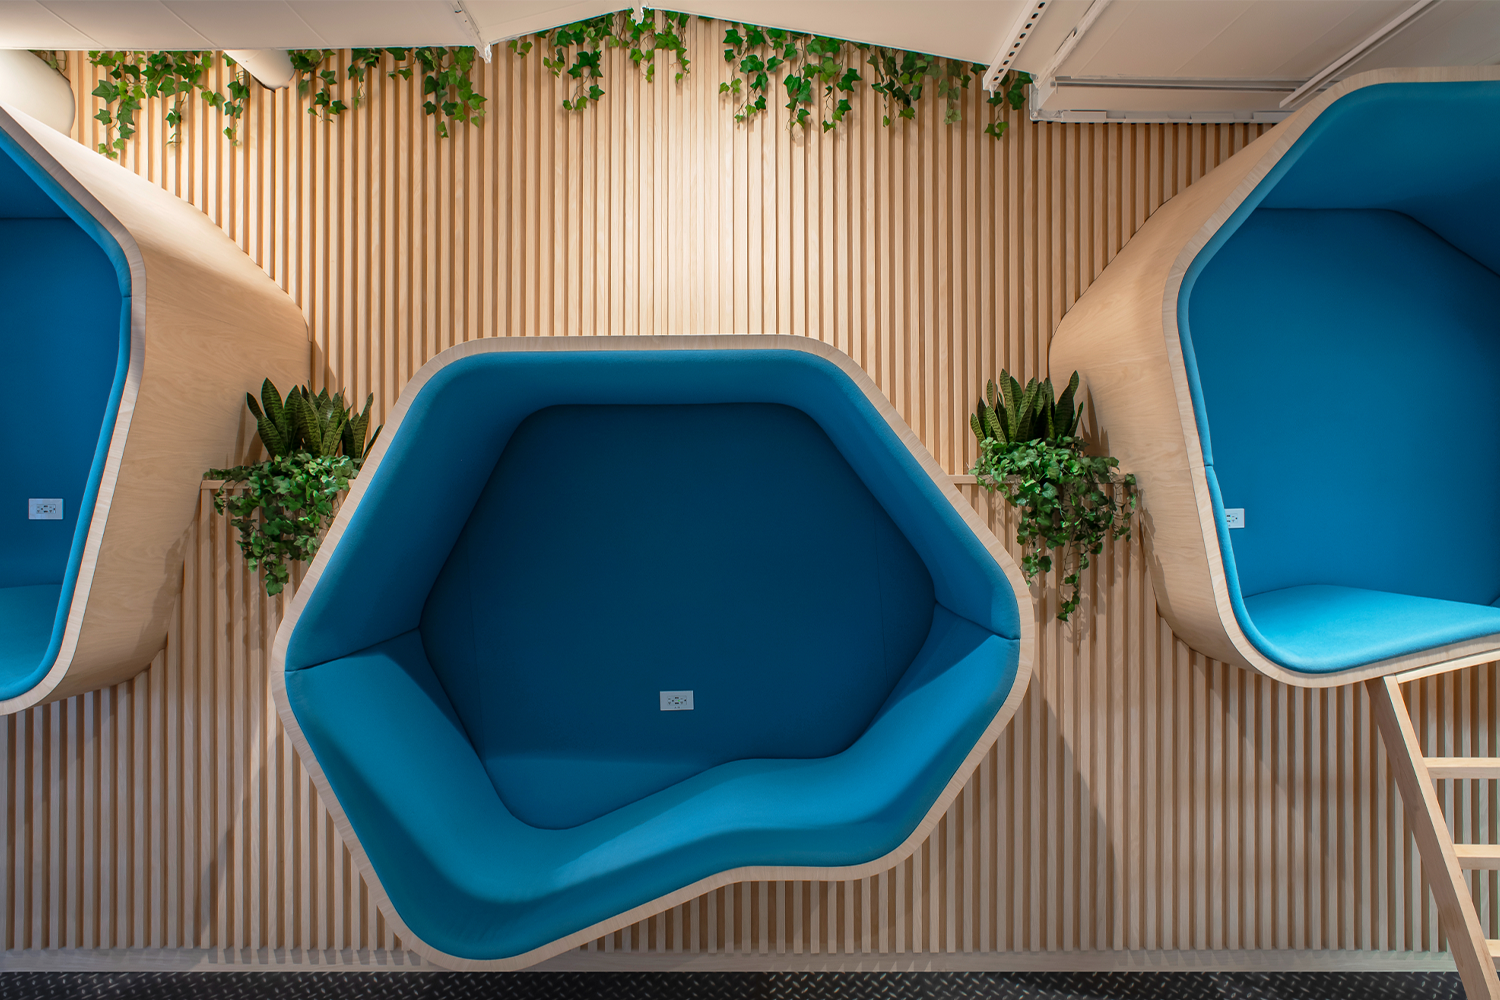 Sustainable office design by K2 Space